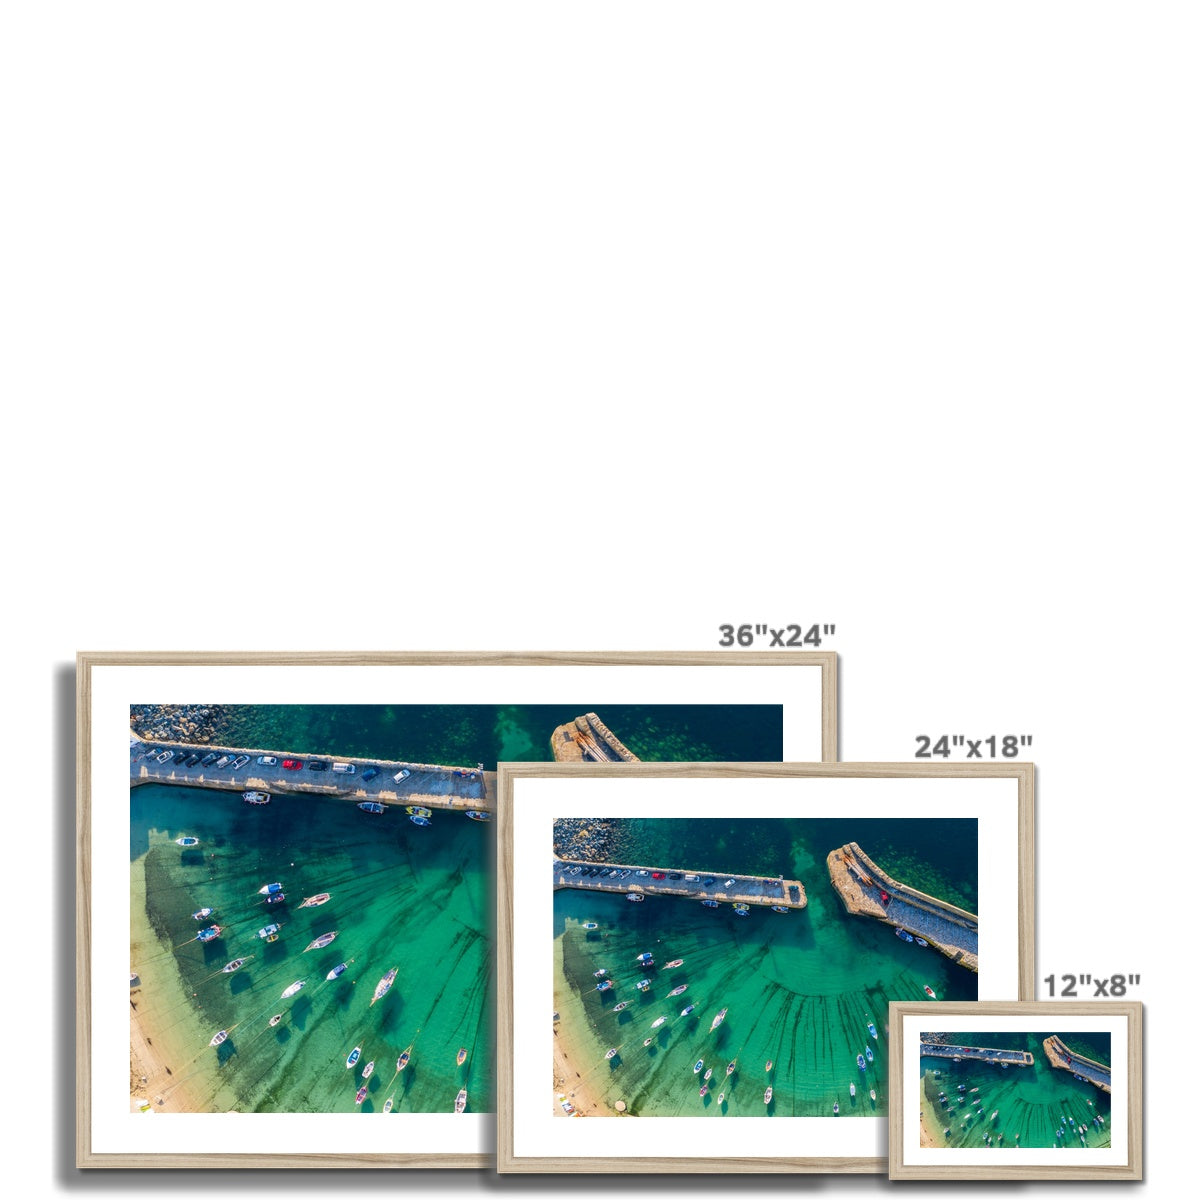 mousehole harbour frame sizes